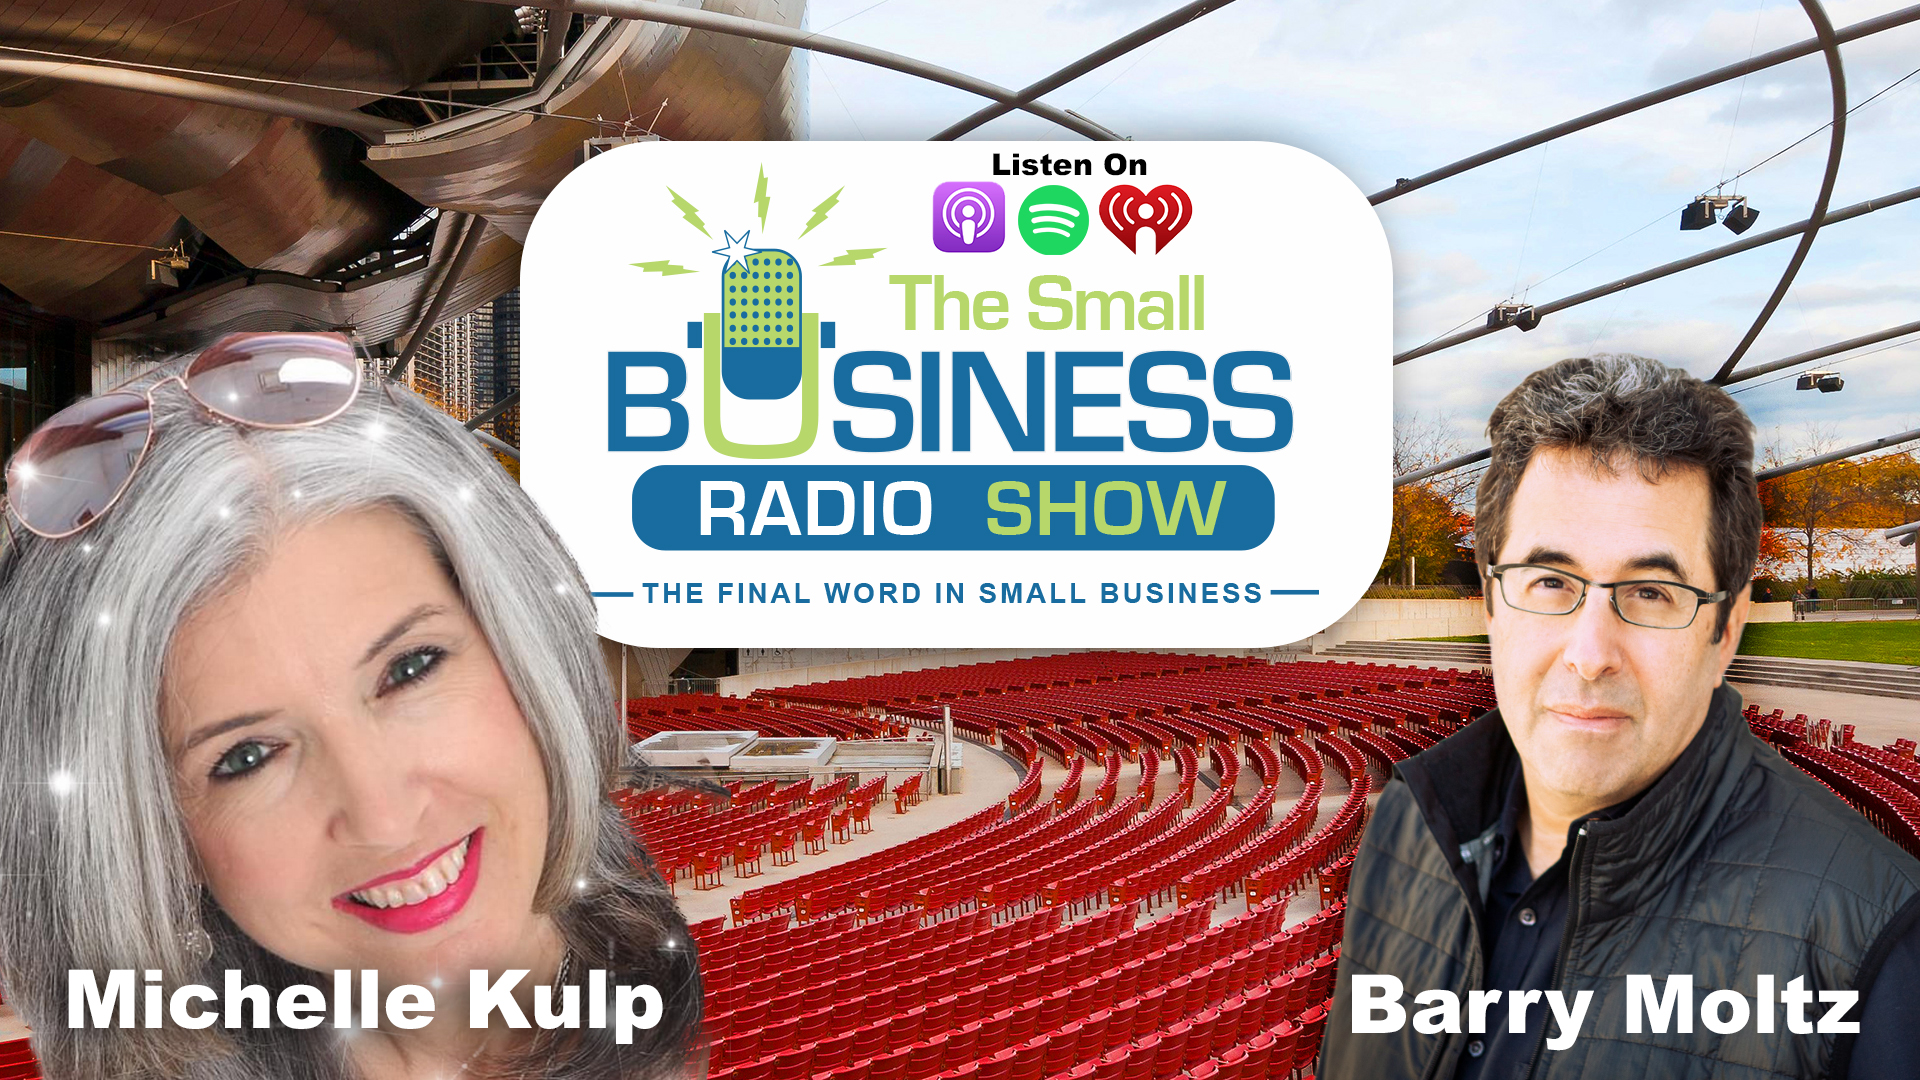 Michelle Kulp on The Small Business Radio Show